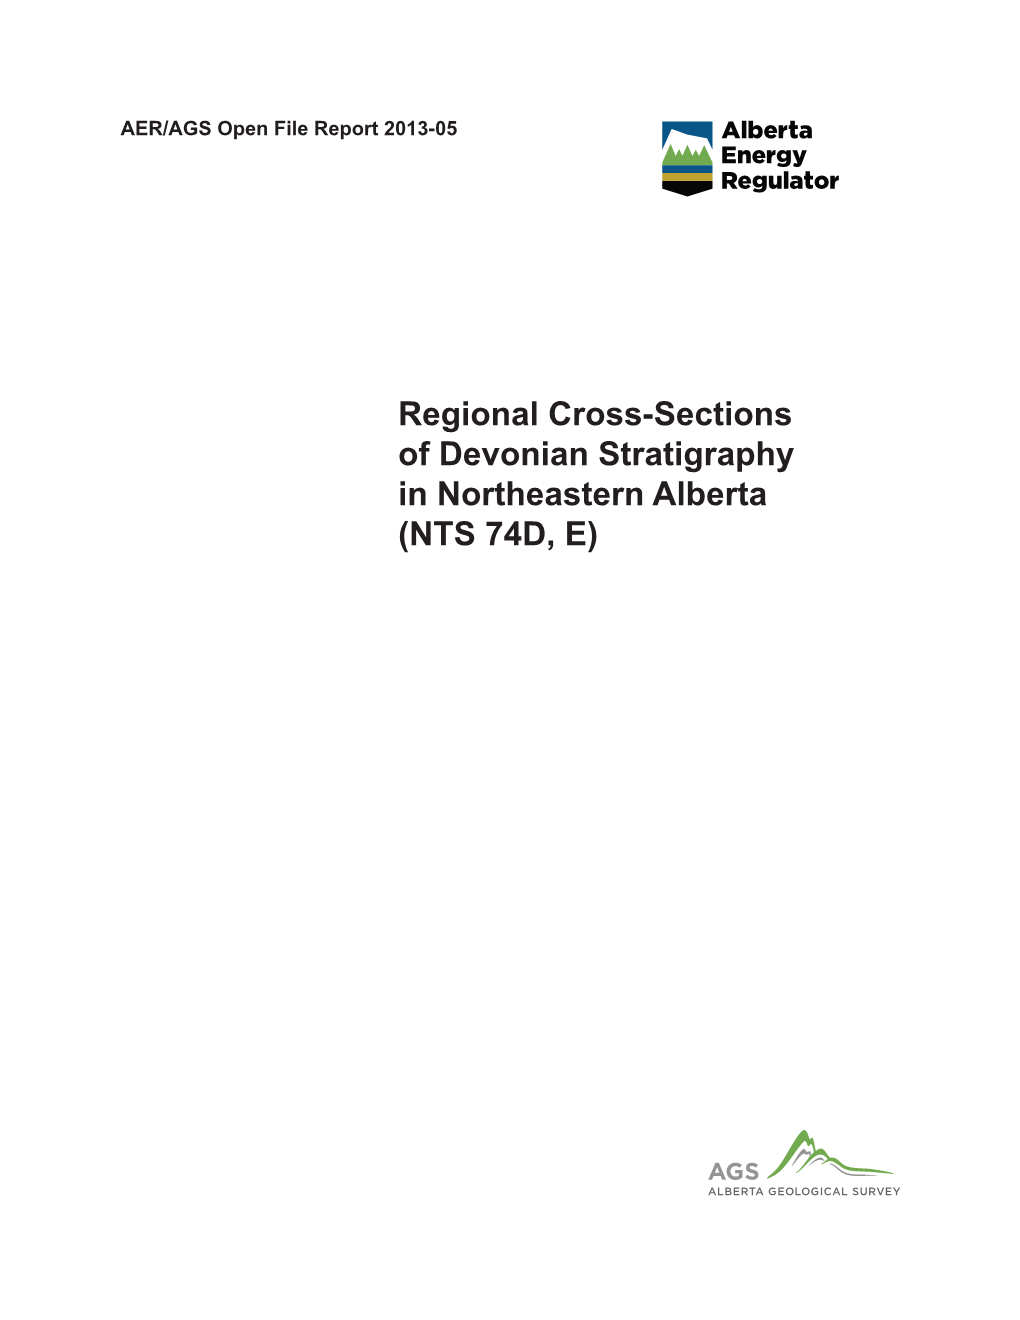 Regional Cross-Sections of Devonian Stratigraphy in Northeastern Alberta (NTS 74D, E) AER/AGS Open File Report 2013-05